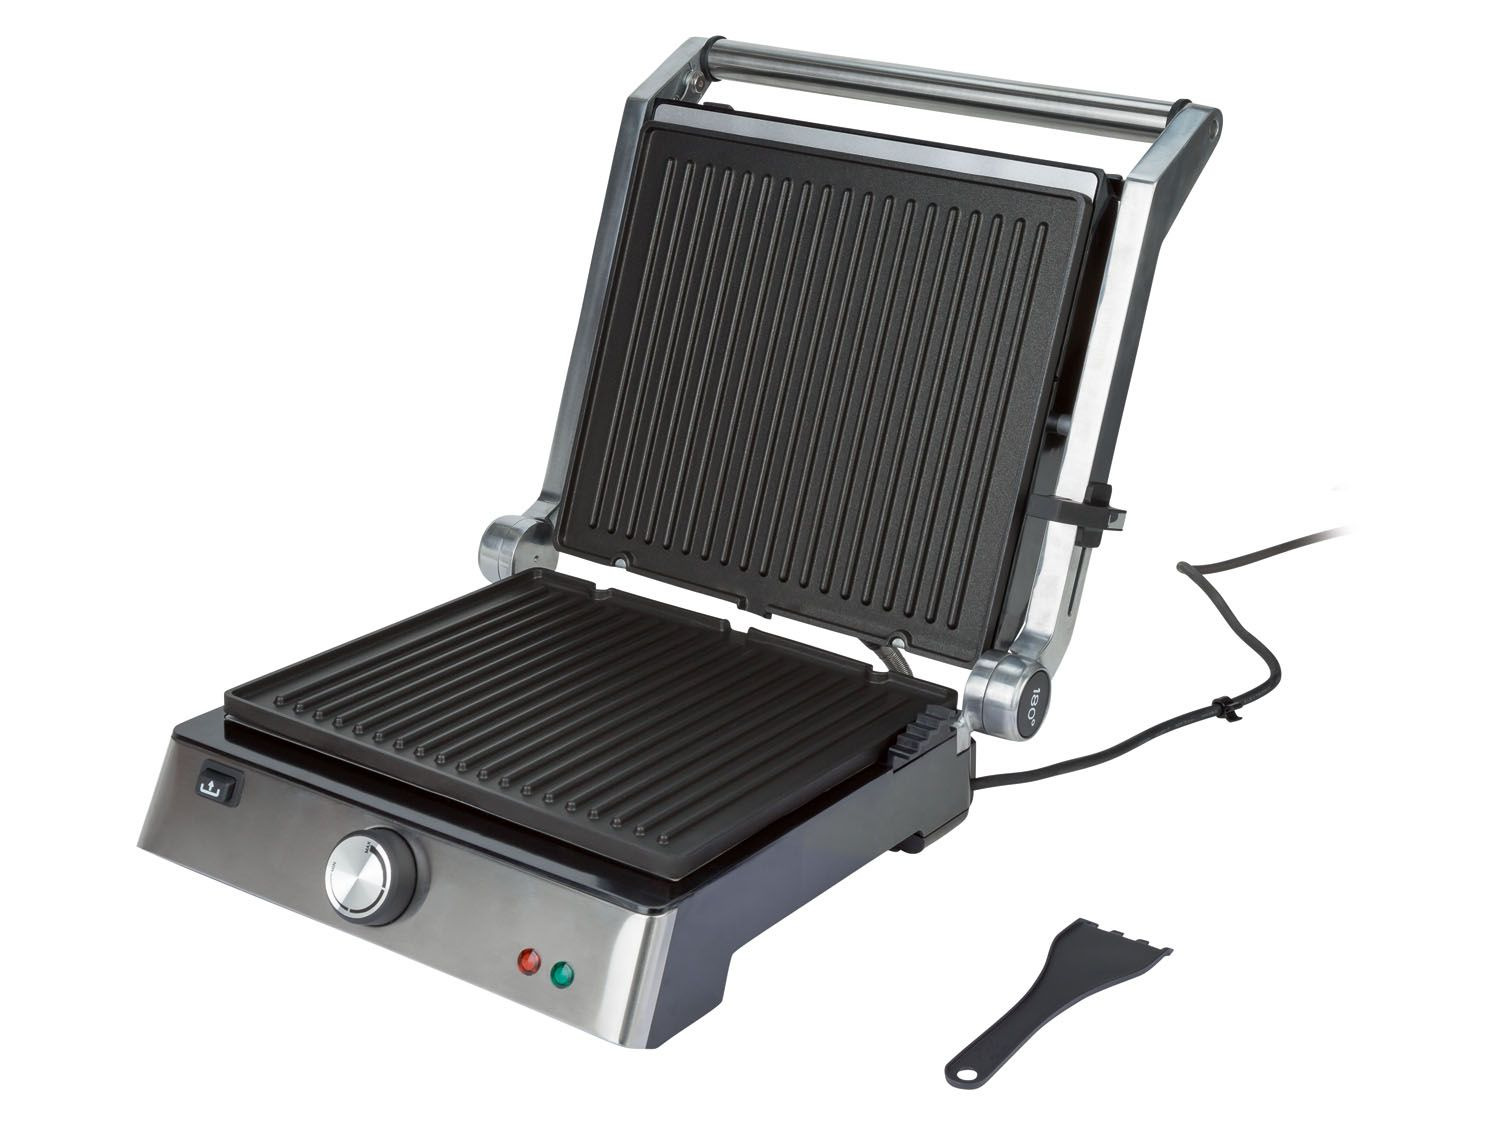 zo overhemd boter SILVERCREST® Contactgrill, 2000 W | Lidl.be